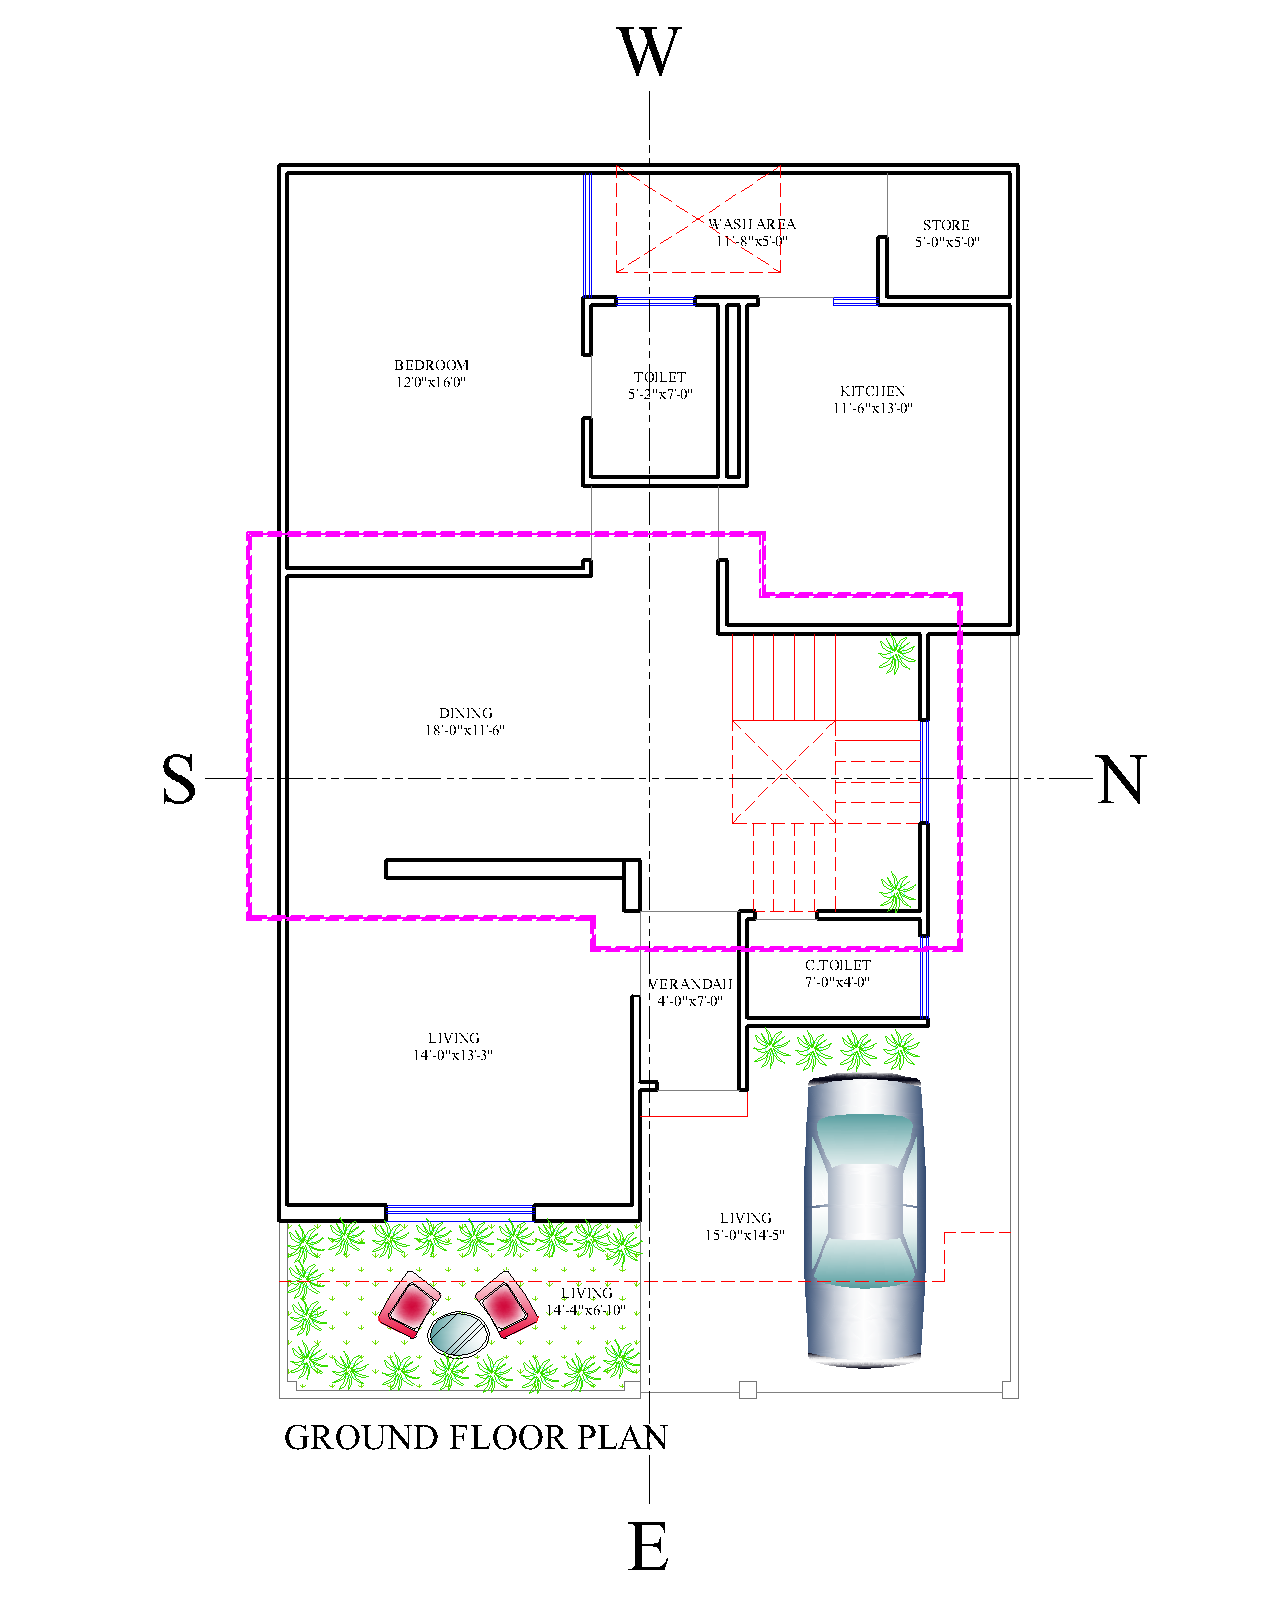 Pin by khawaJ Muhammad on 3 D | Technical drawing, House design, How to plan